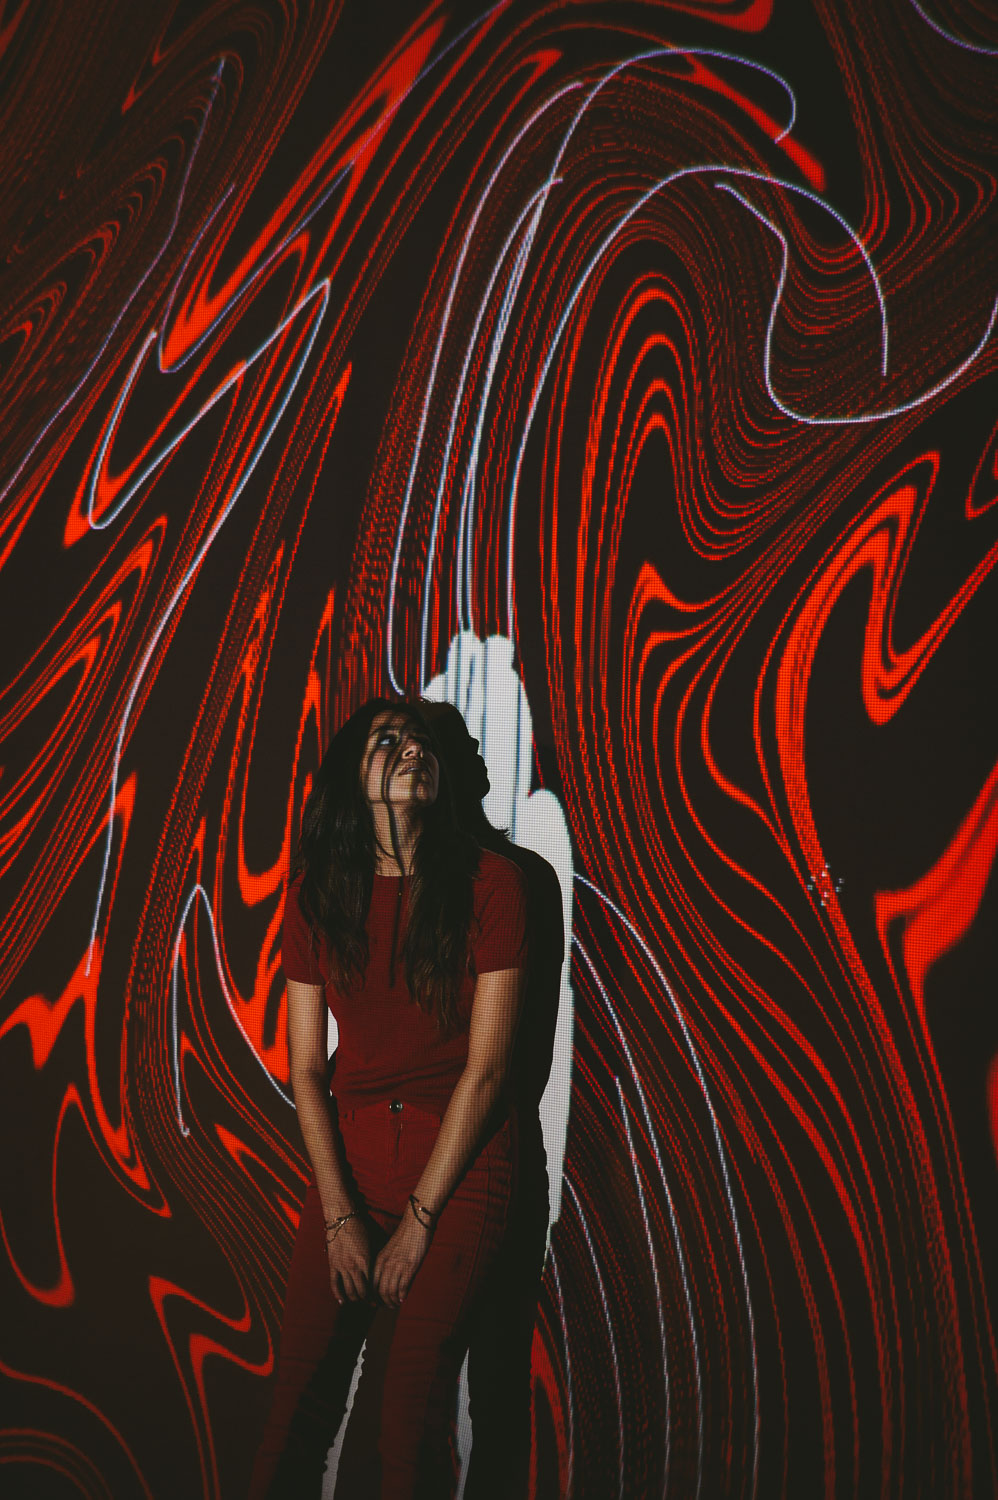 IU C&I Studios Post Artwalk self projection live art exhibit by C&I Studios with woman with long black hair in front of red artwork looking up